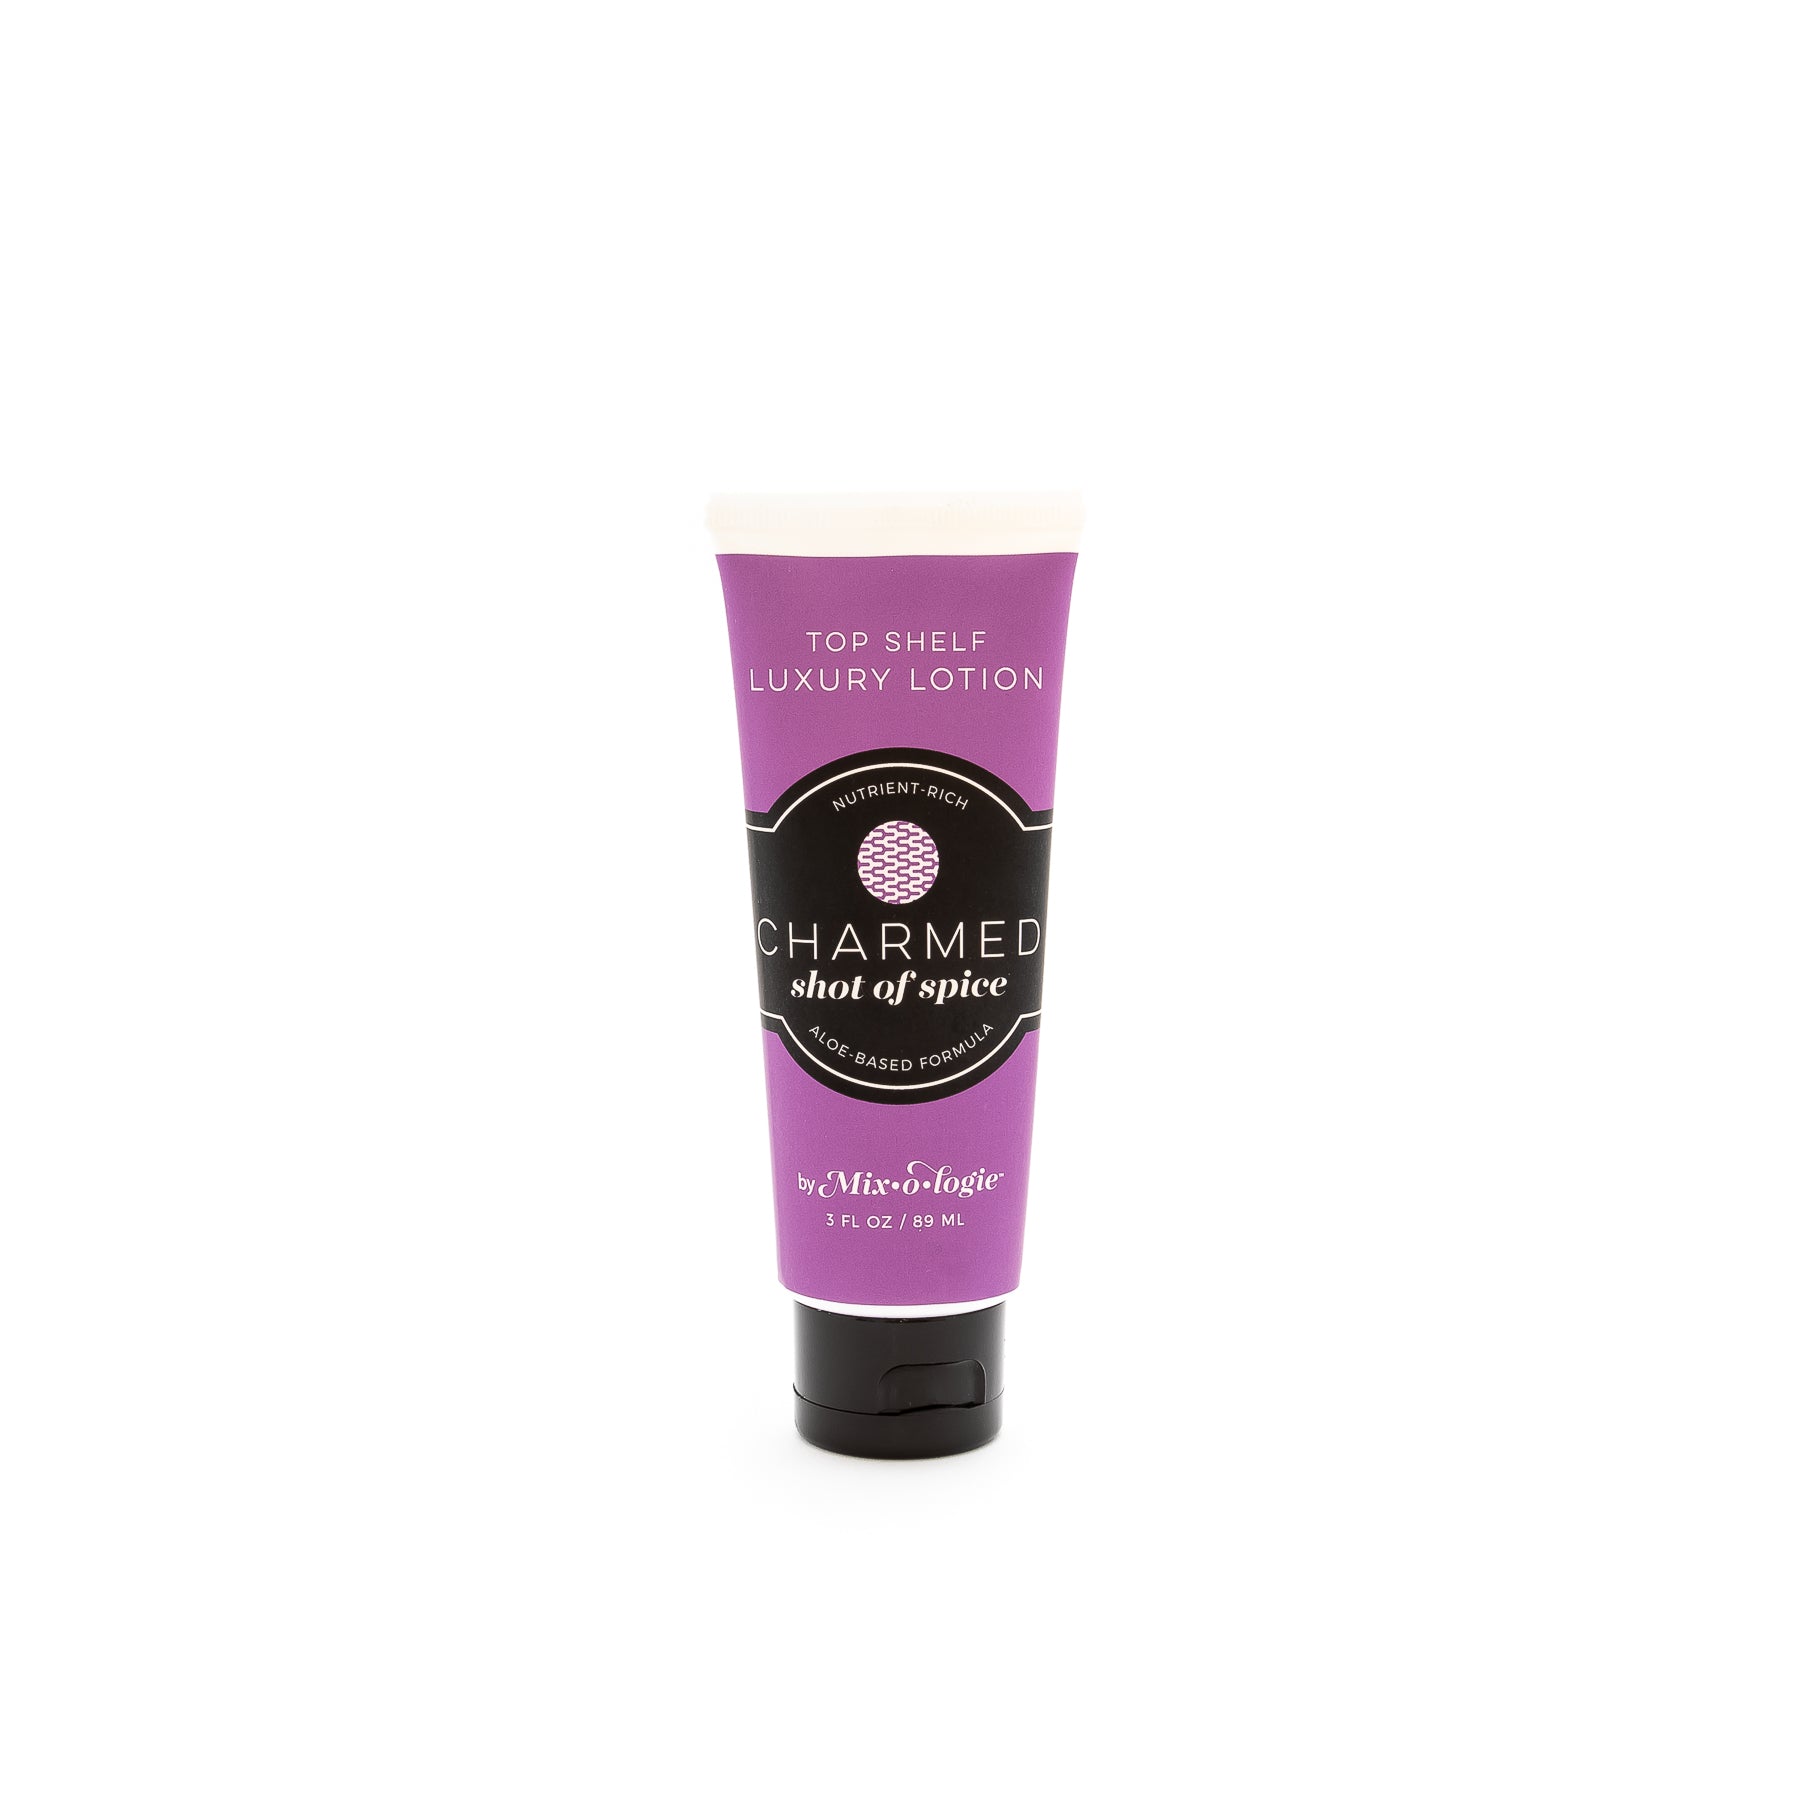 Charmed (Shot of Spice) Top Shelf Lotion in dark purple tube with black lid and label. Nutrient rich, aloe-based formula, tube has 5 fl oz or 89 mL. Pictured with white background.